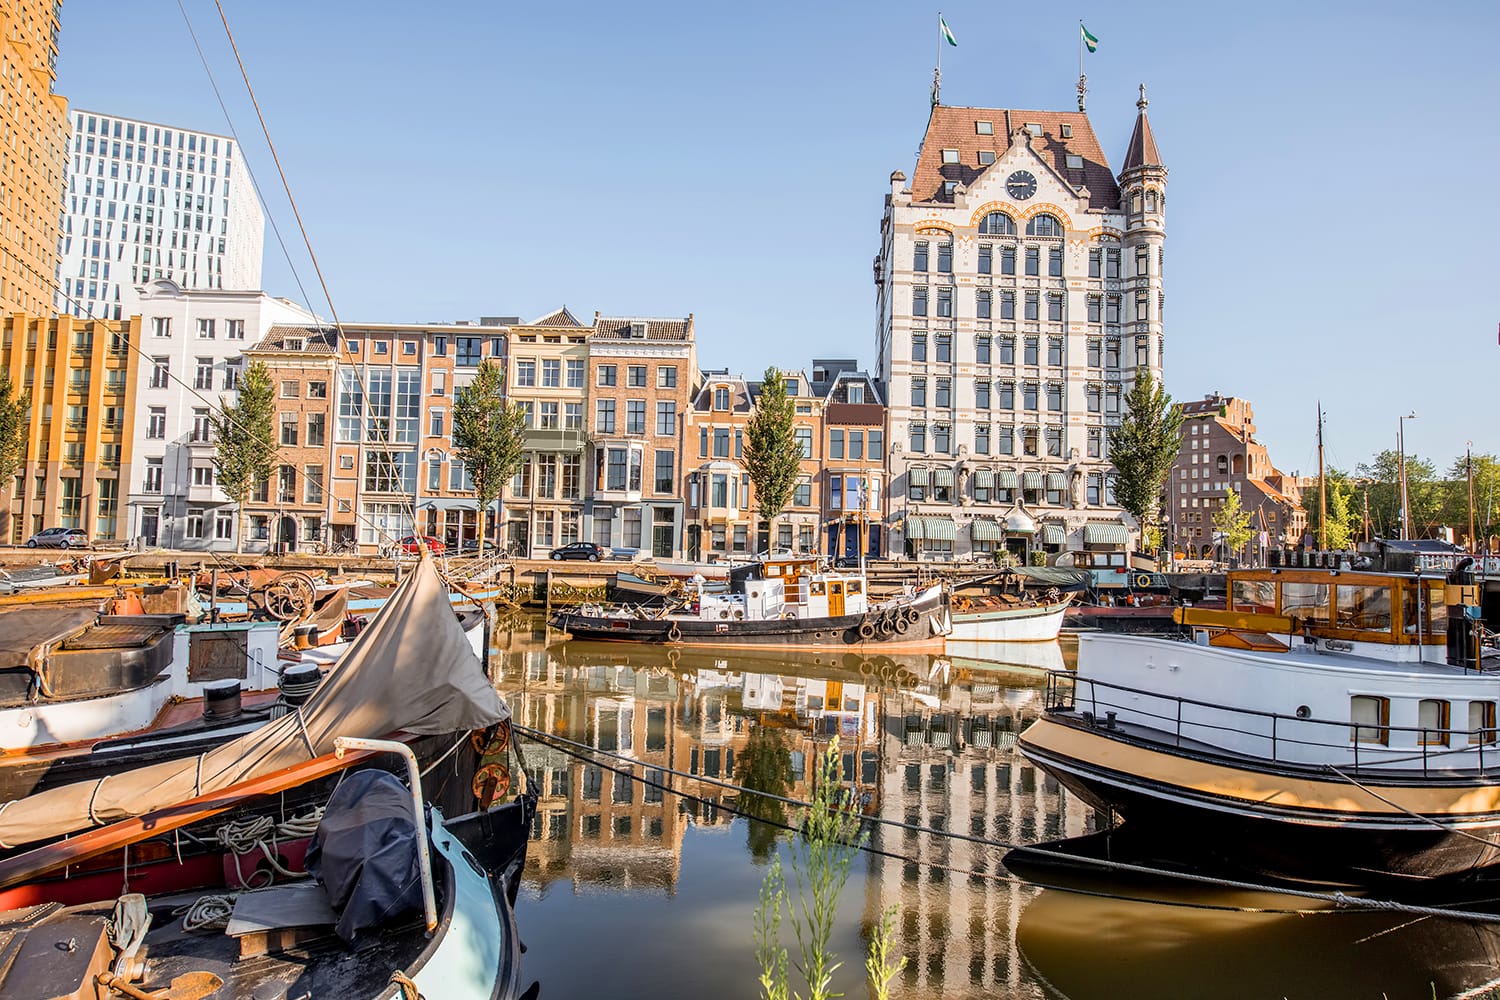 View on the old part of Wijn haven with boats during the morning in Rotterdam, Netherlands